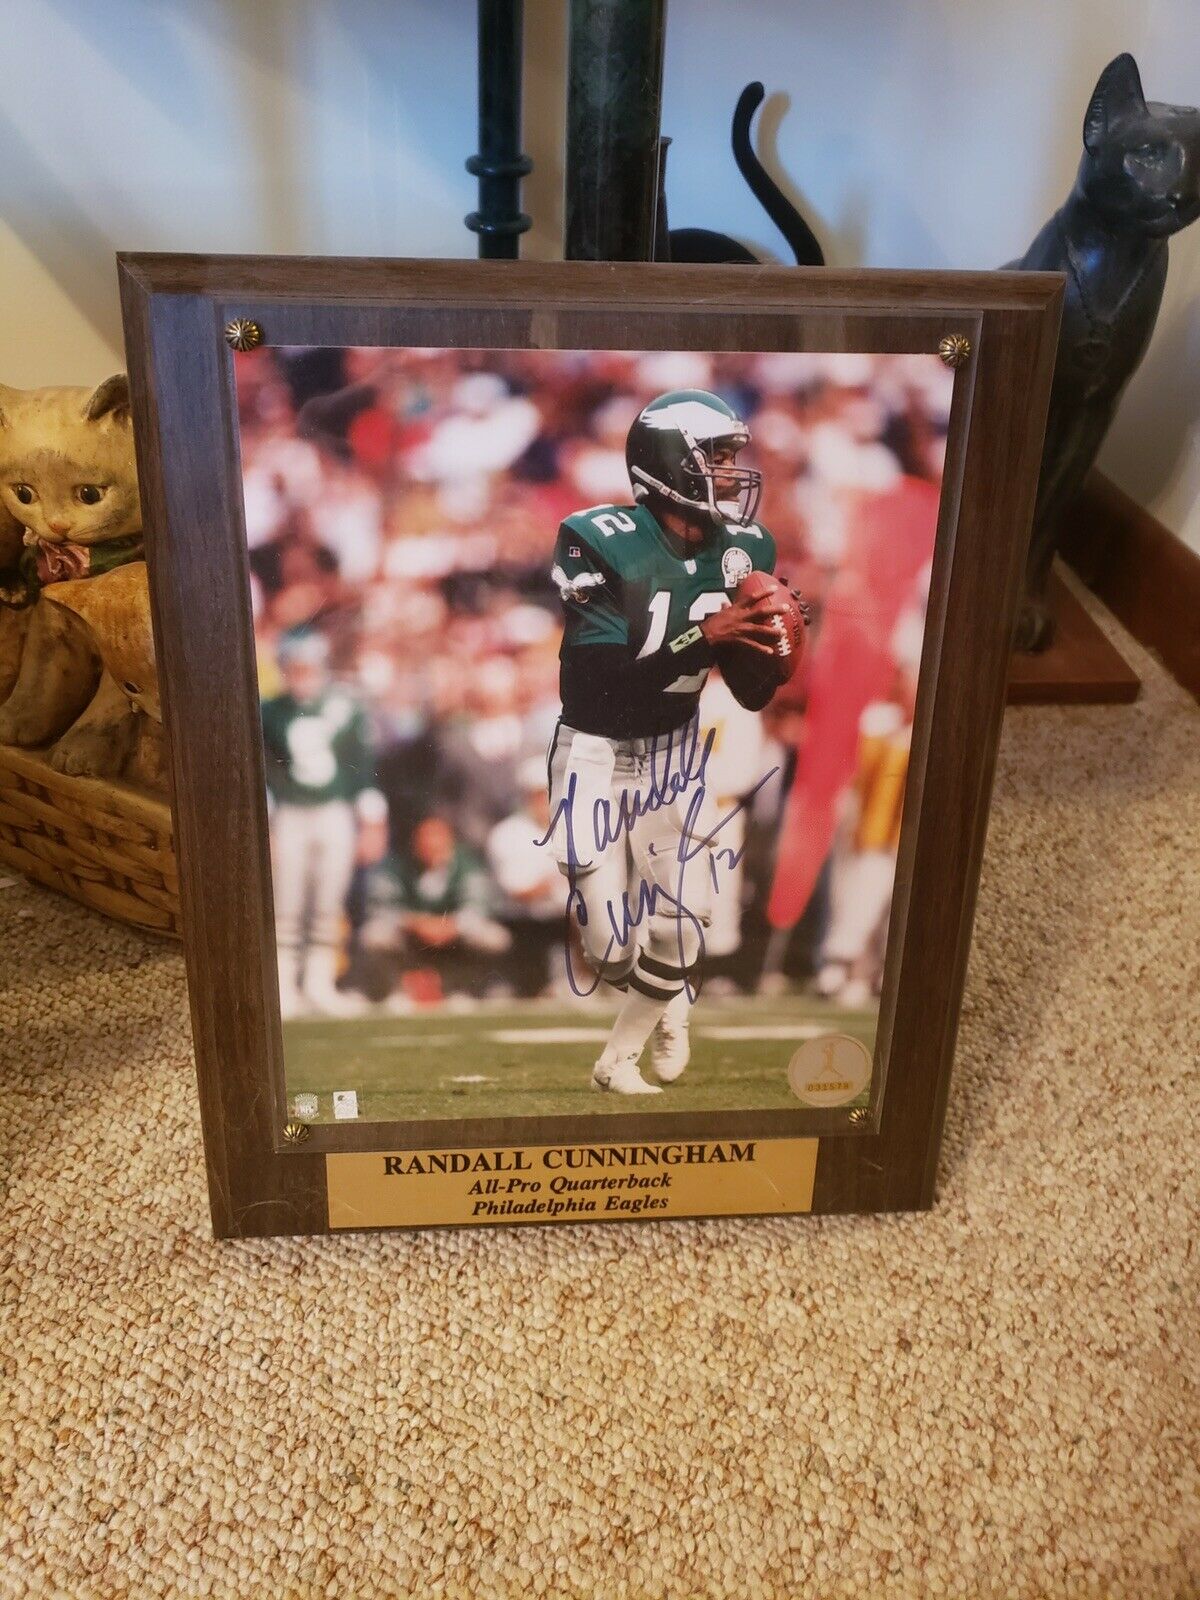 Randall Cunningham Autographed Framed Art - Exclusive Plaque